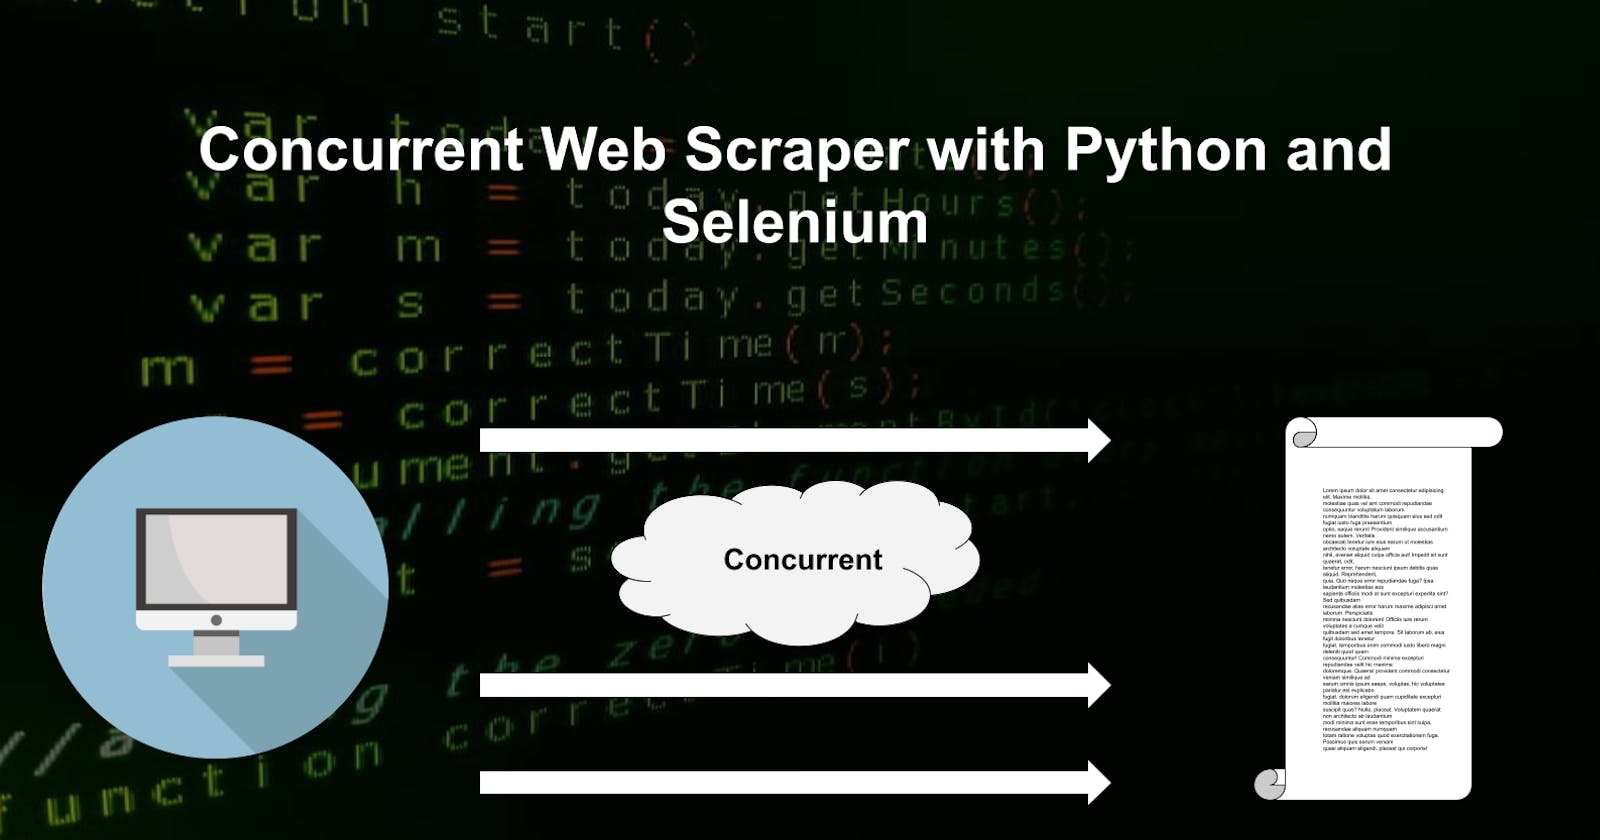 Building a Concurrent Web Scraper with Python and Selenium